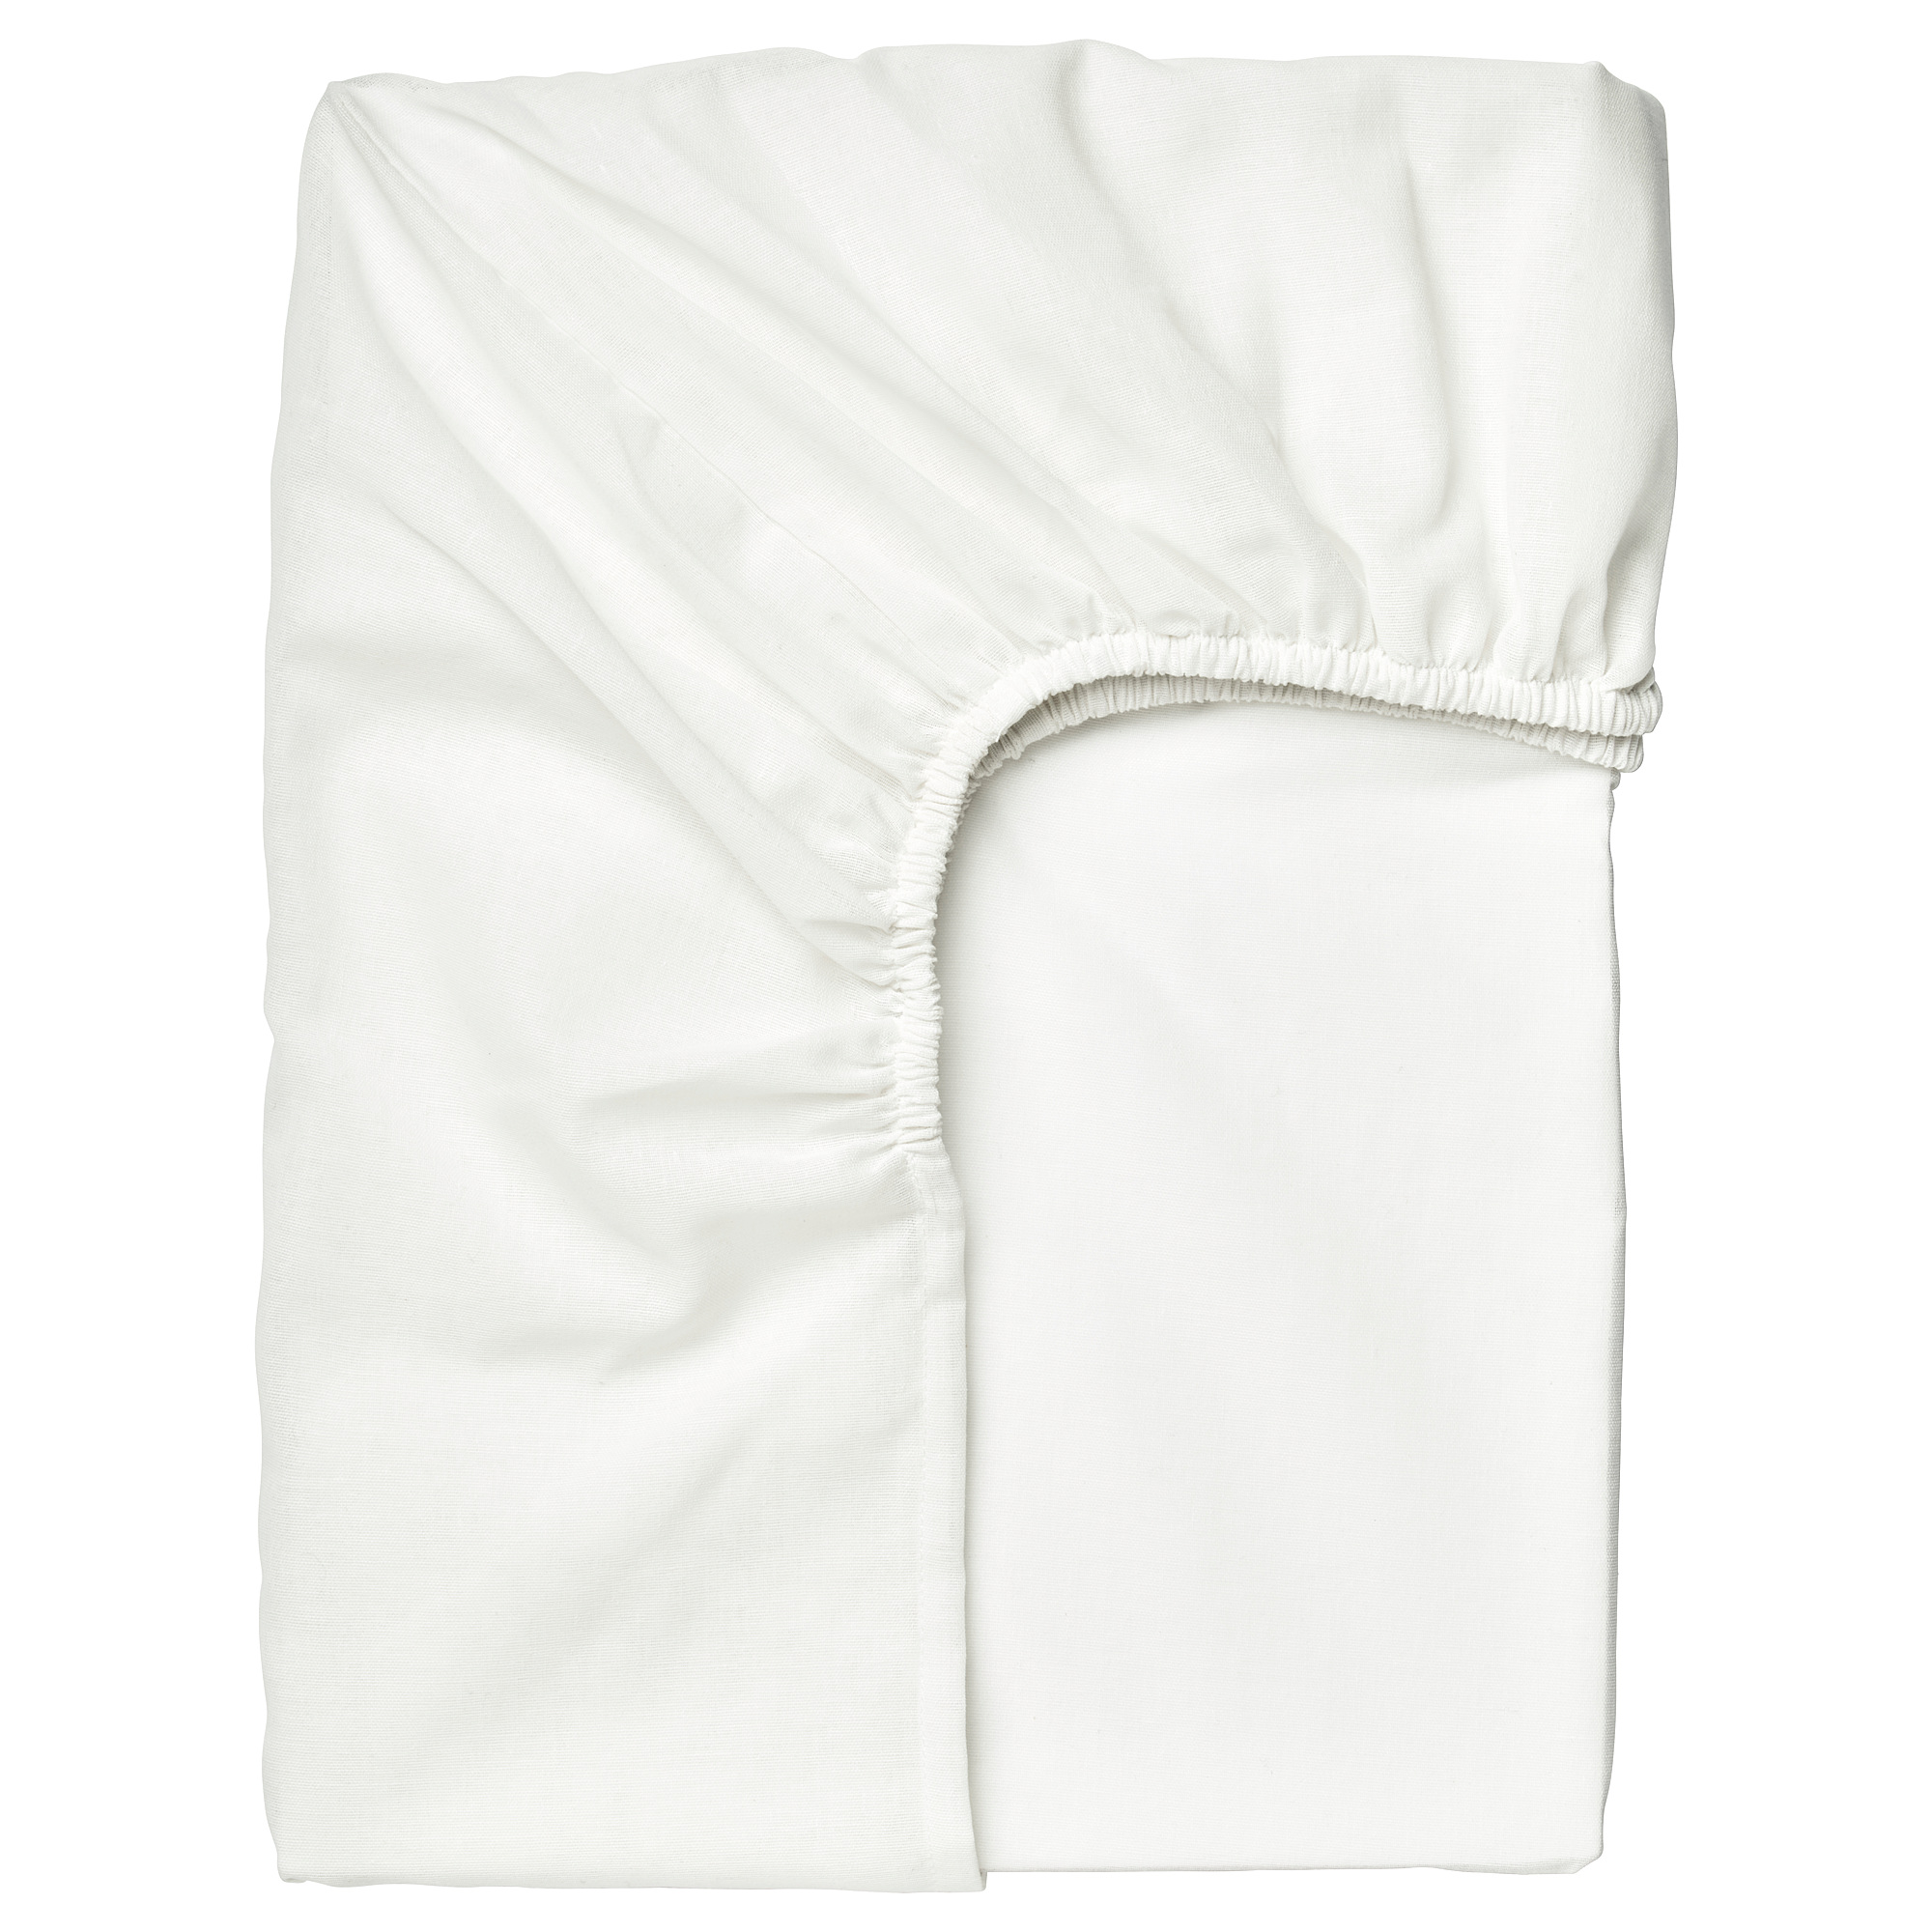 TAGGVALLMO fitted sheet